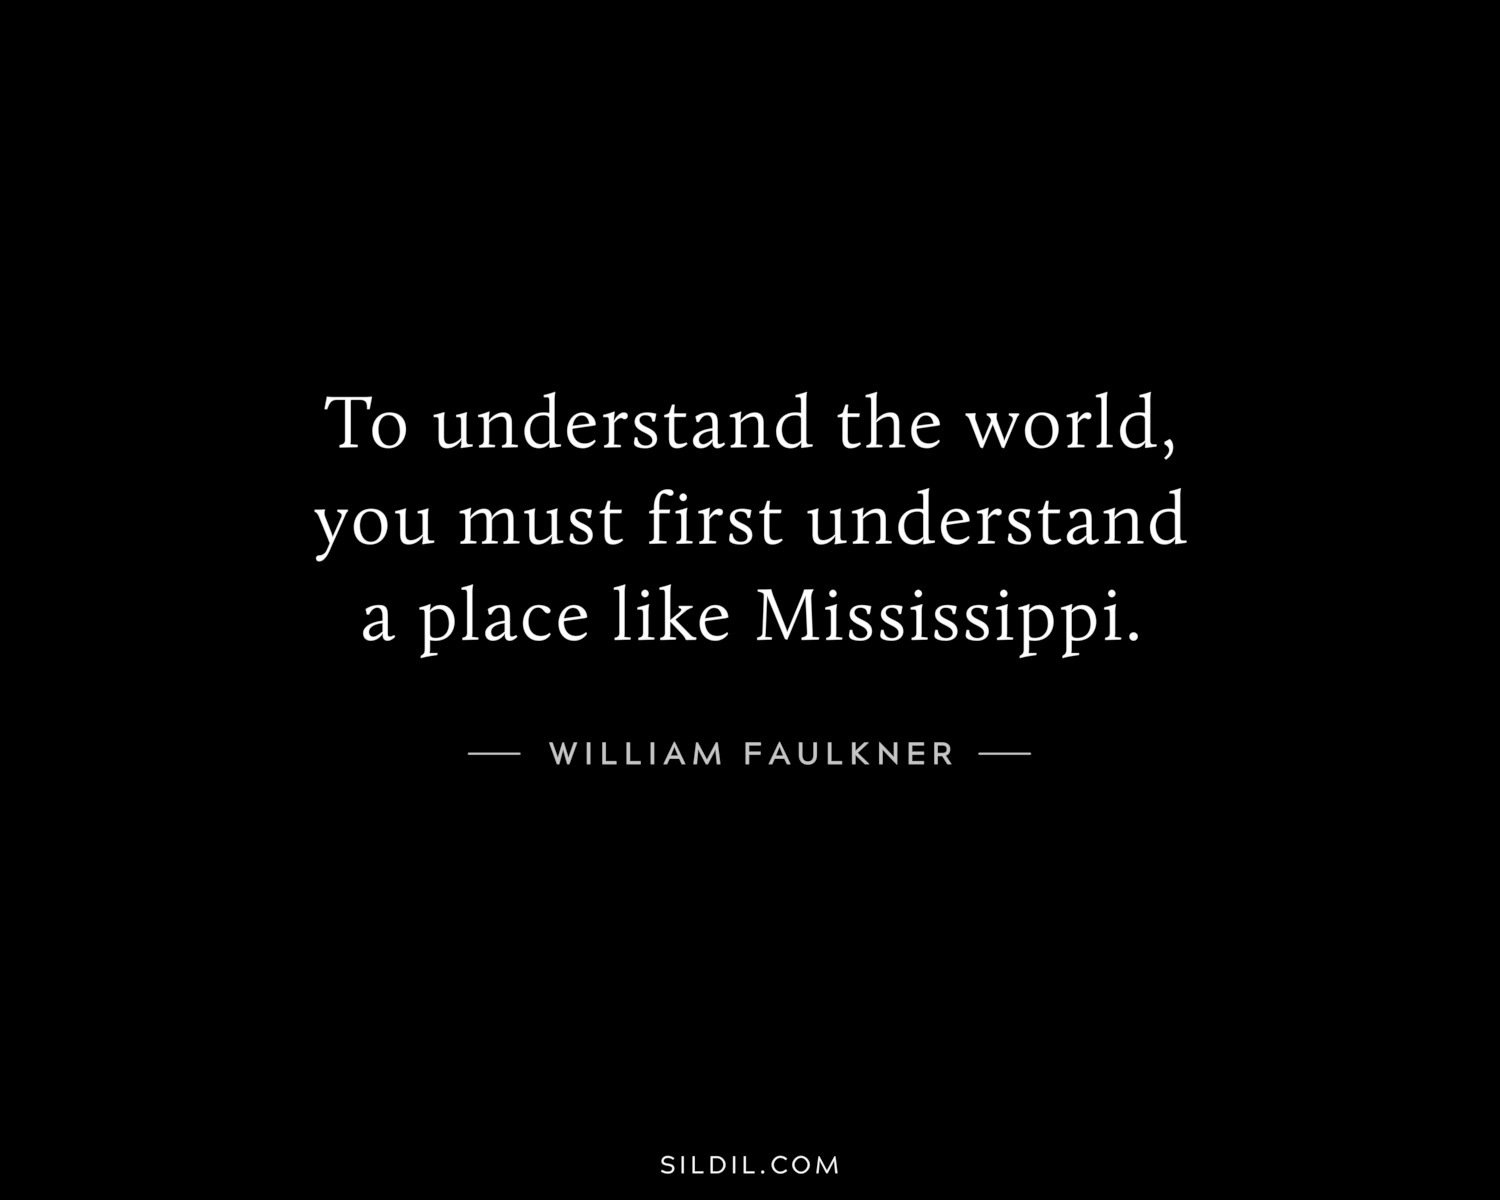 To understand the world, you must first understand a place like Mississippi.